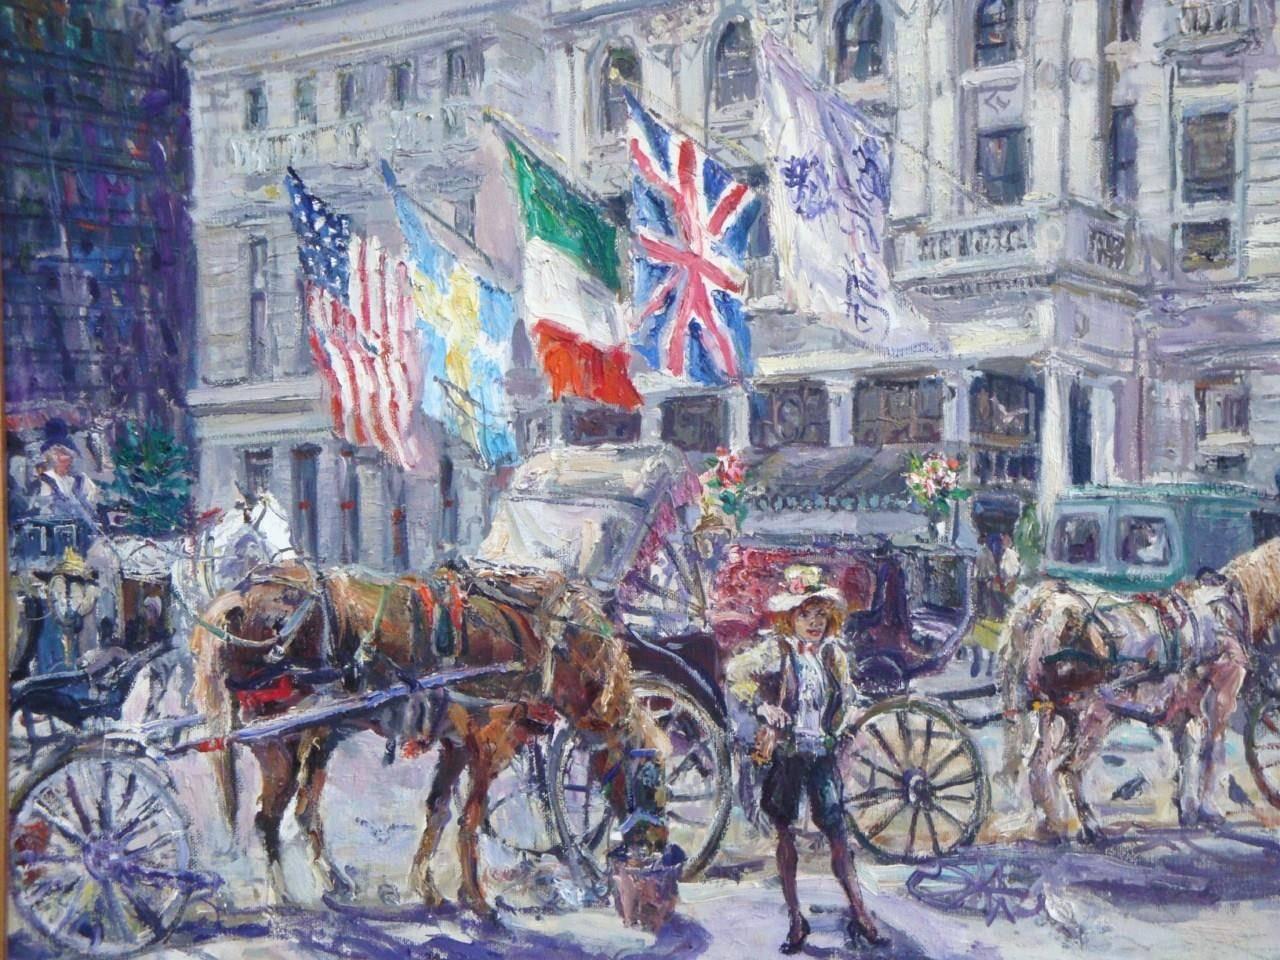 A spectacular original oil on canvas painting by world renowned Russian artist Valery Tsarikovsky (TSAR). Painting showcases The Legendary Landmark Plaza Hotel in New York City with Beautiful Horse and Carriages. Signed and dated on lower bottom and